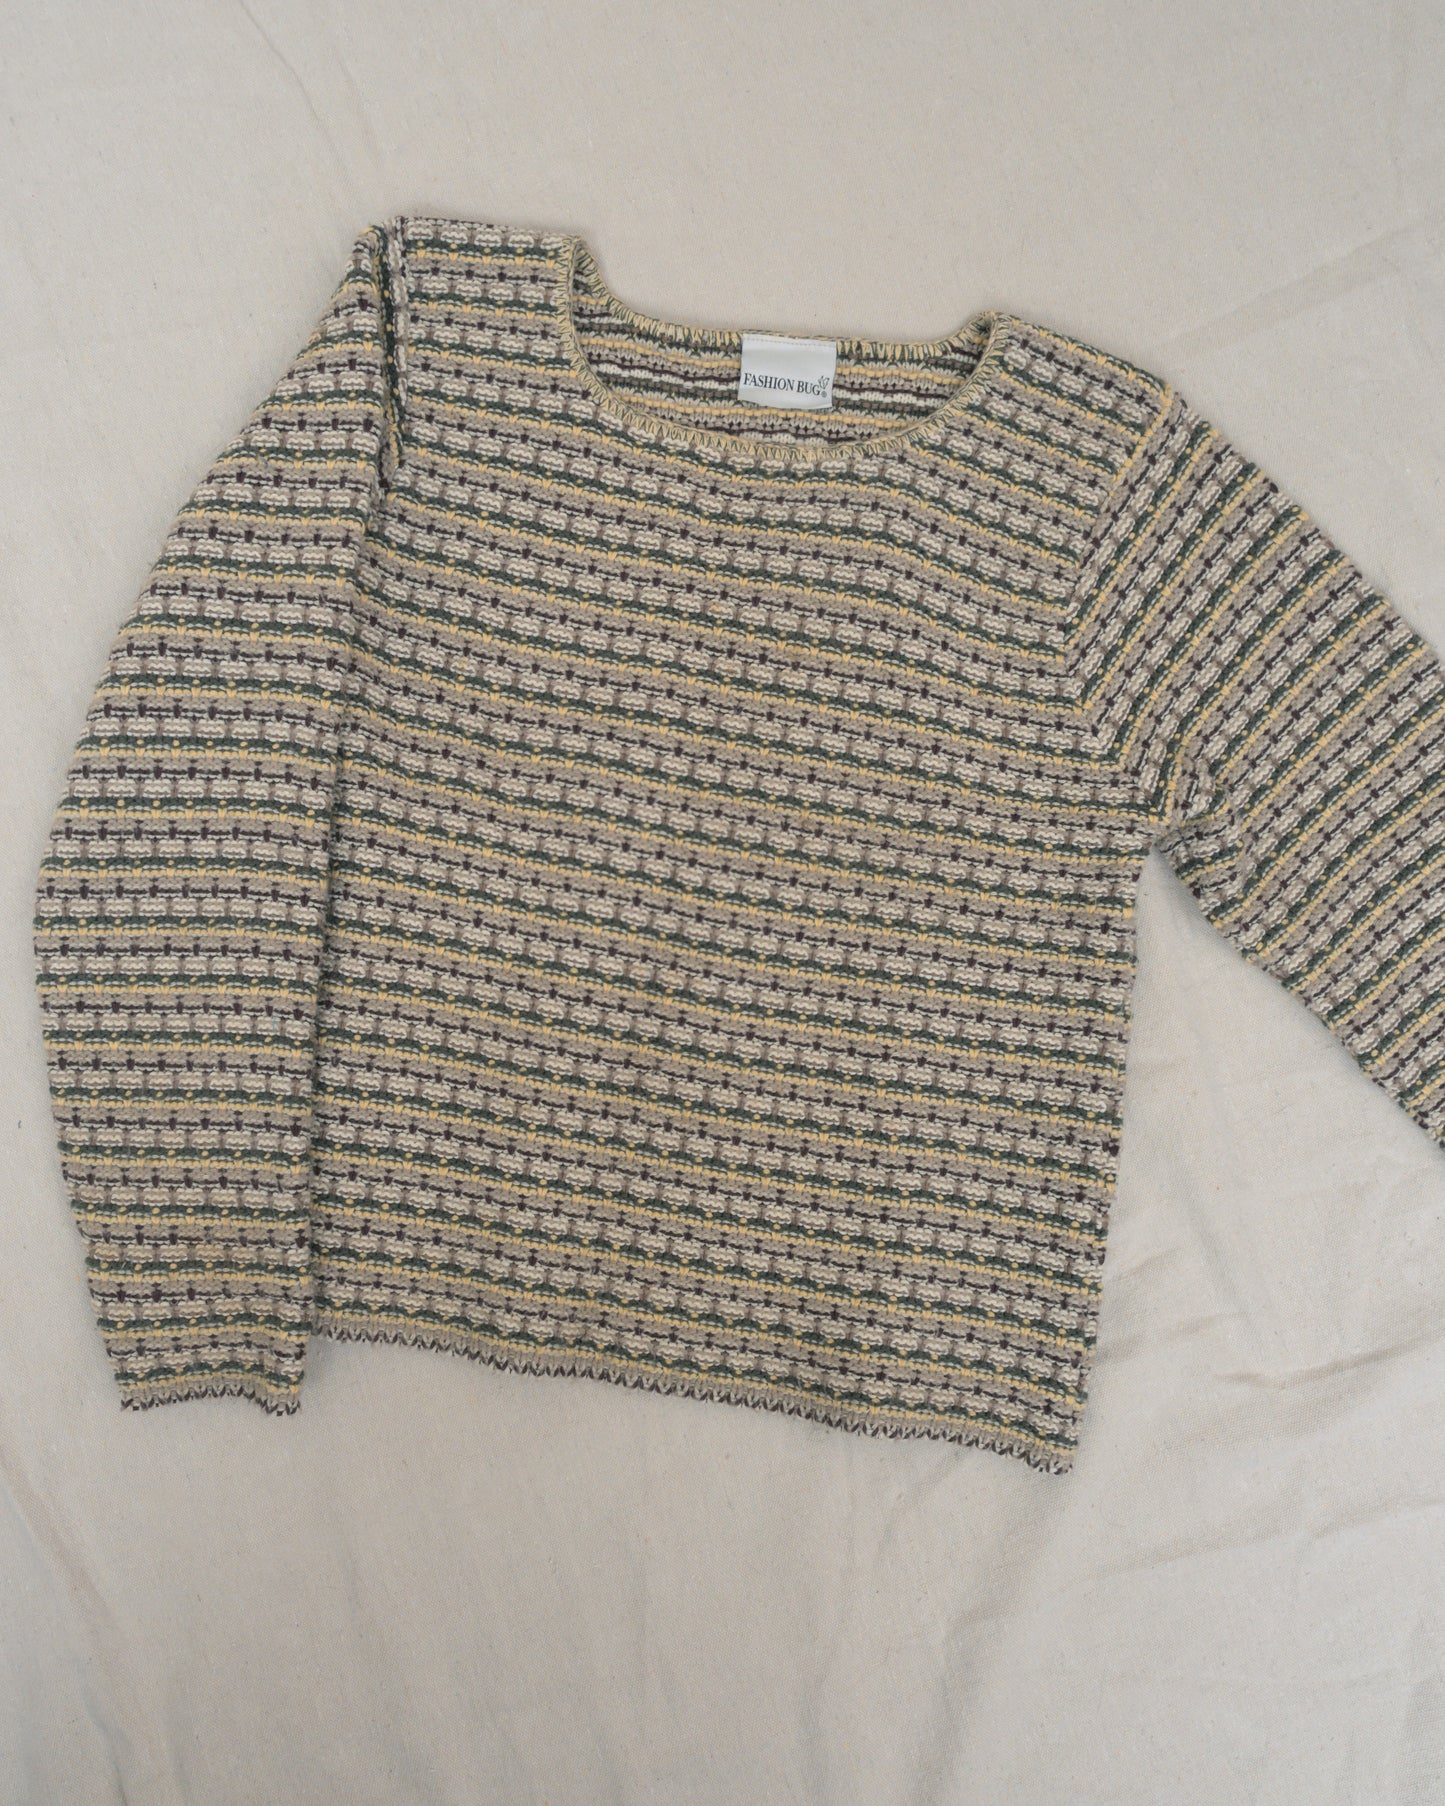 Vintage Multicolored Knit Sweater (S/M)